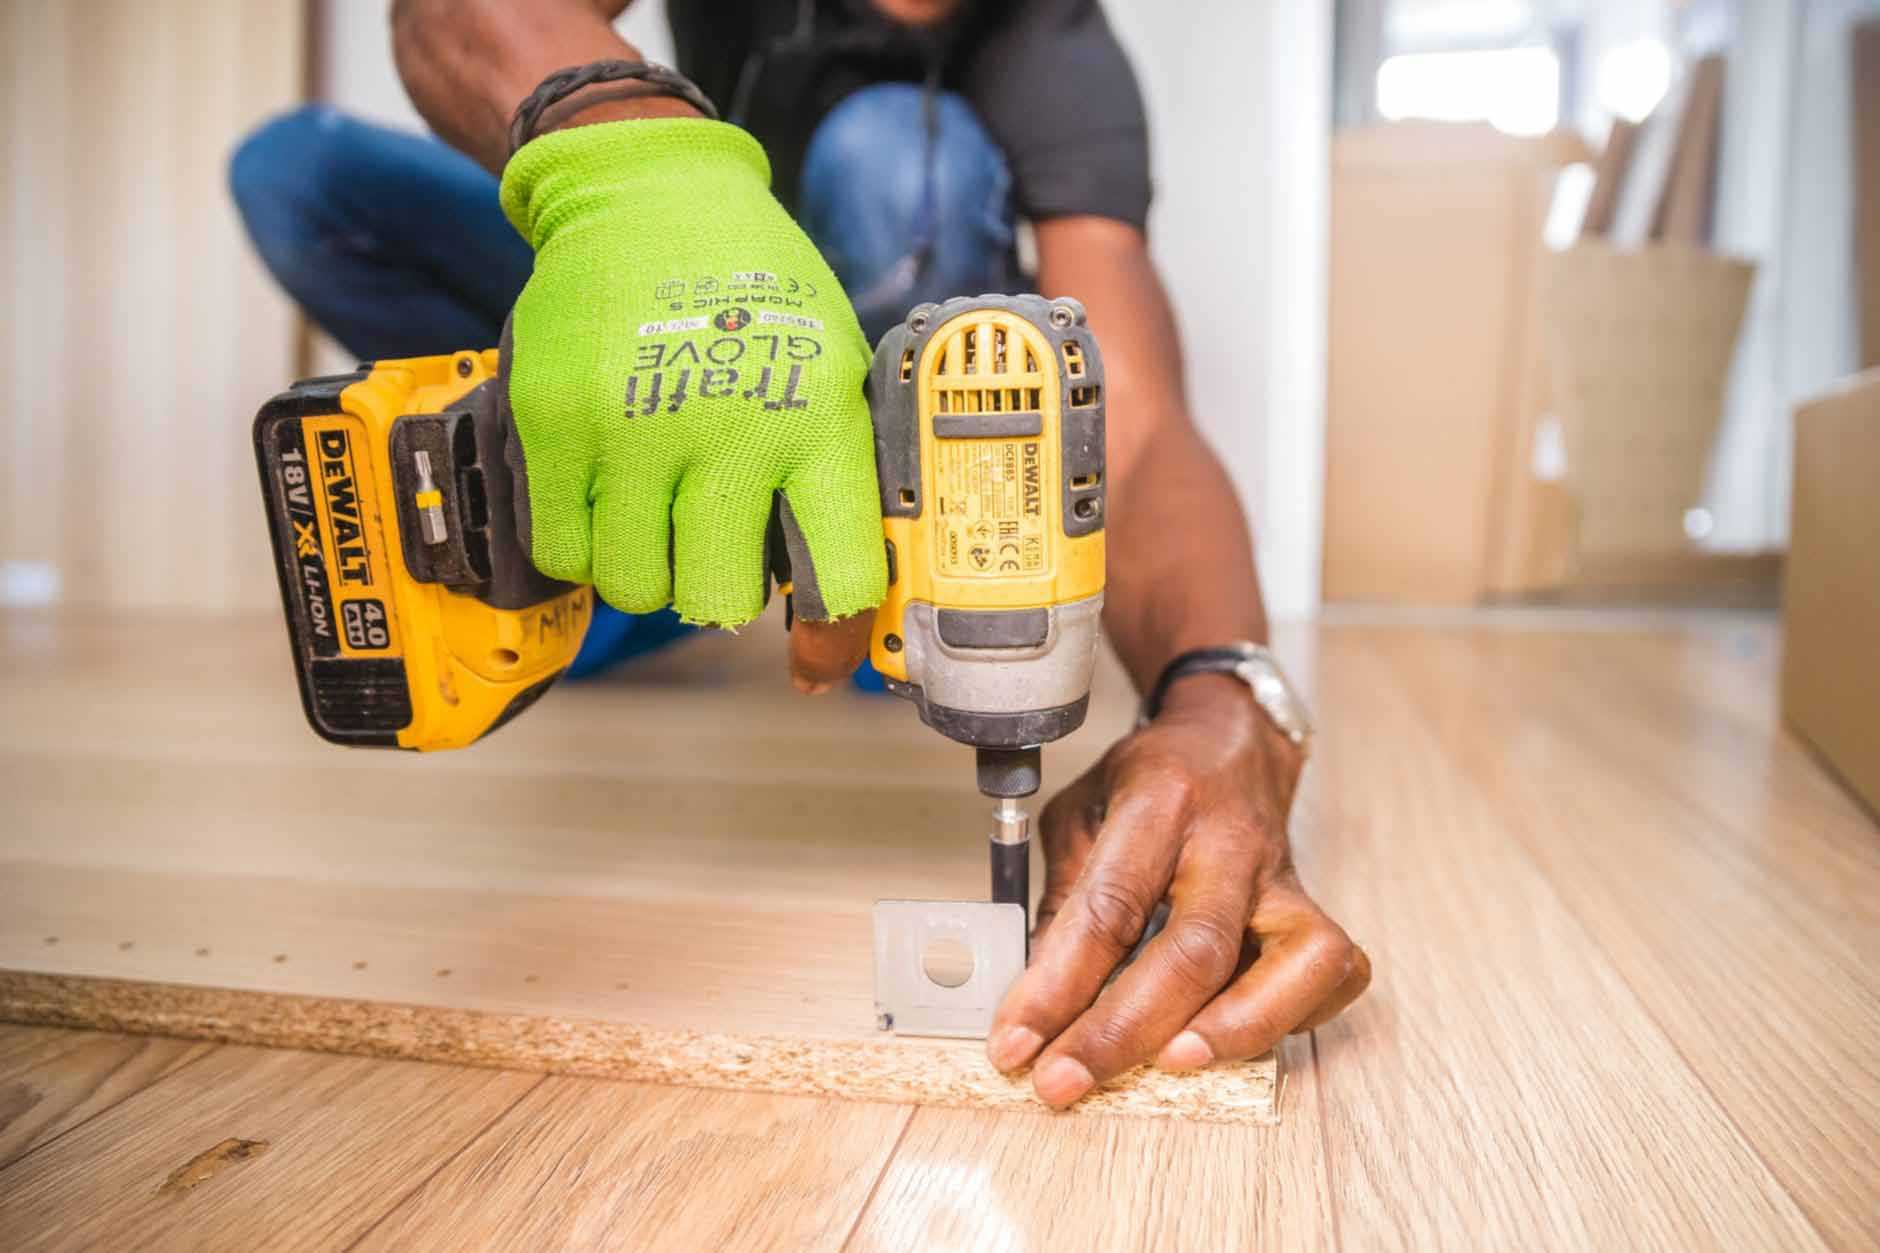 Man with Power Drill Screwing Wood